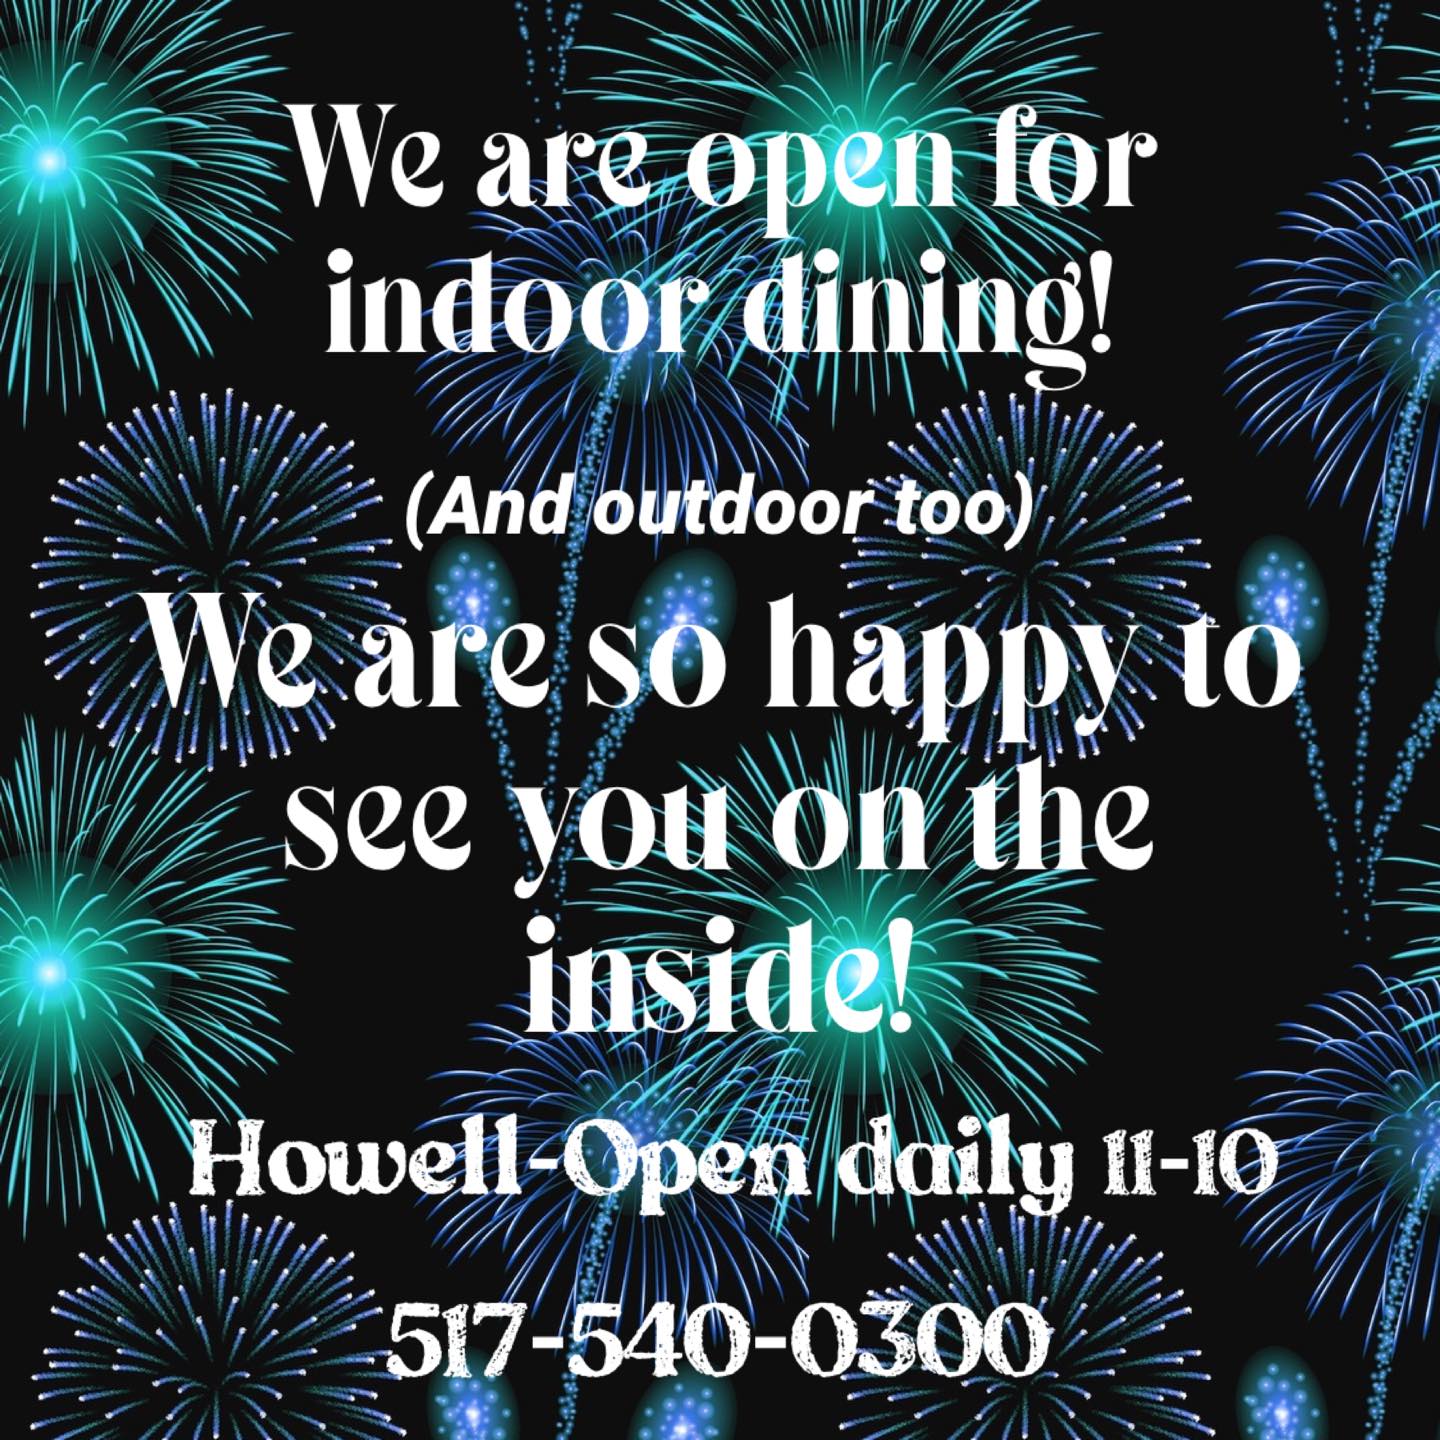 We are so happy to see you on the inside (and outside too)!